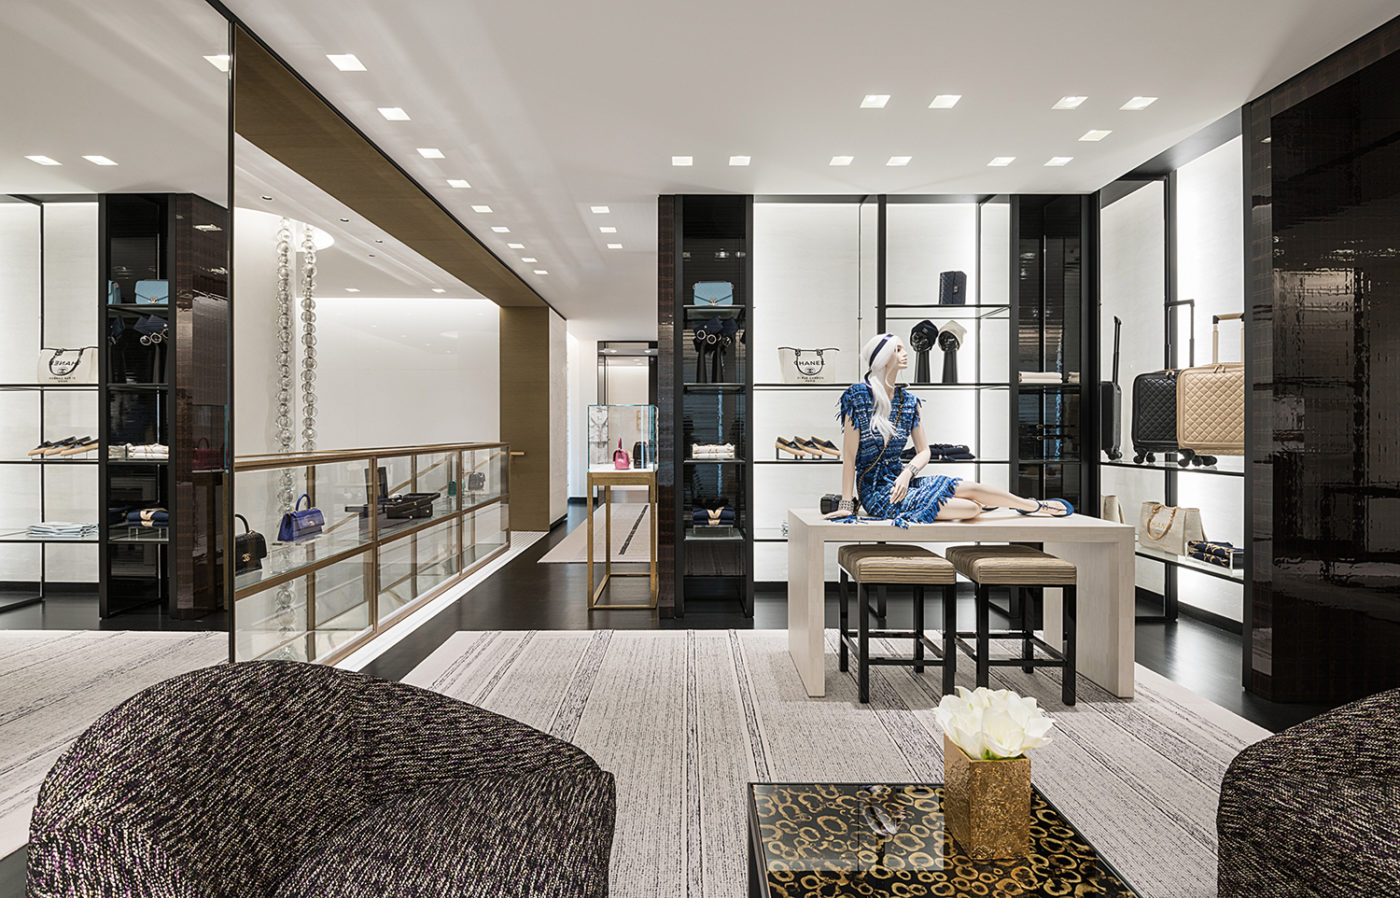 Inside The New Chanel Flagship Boutique In Beverly Hills